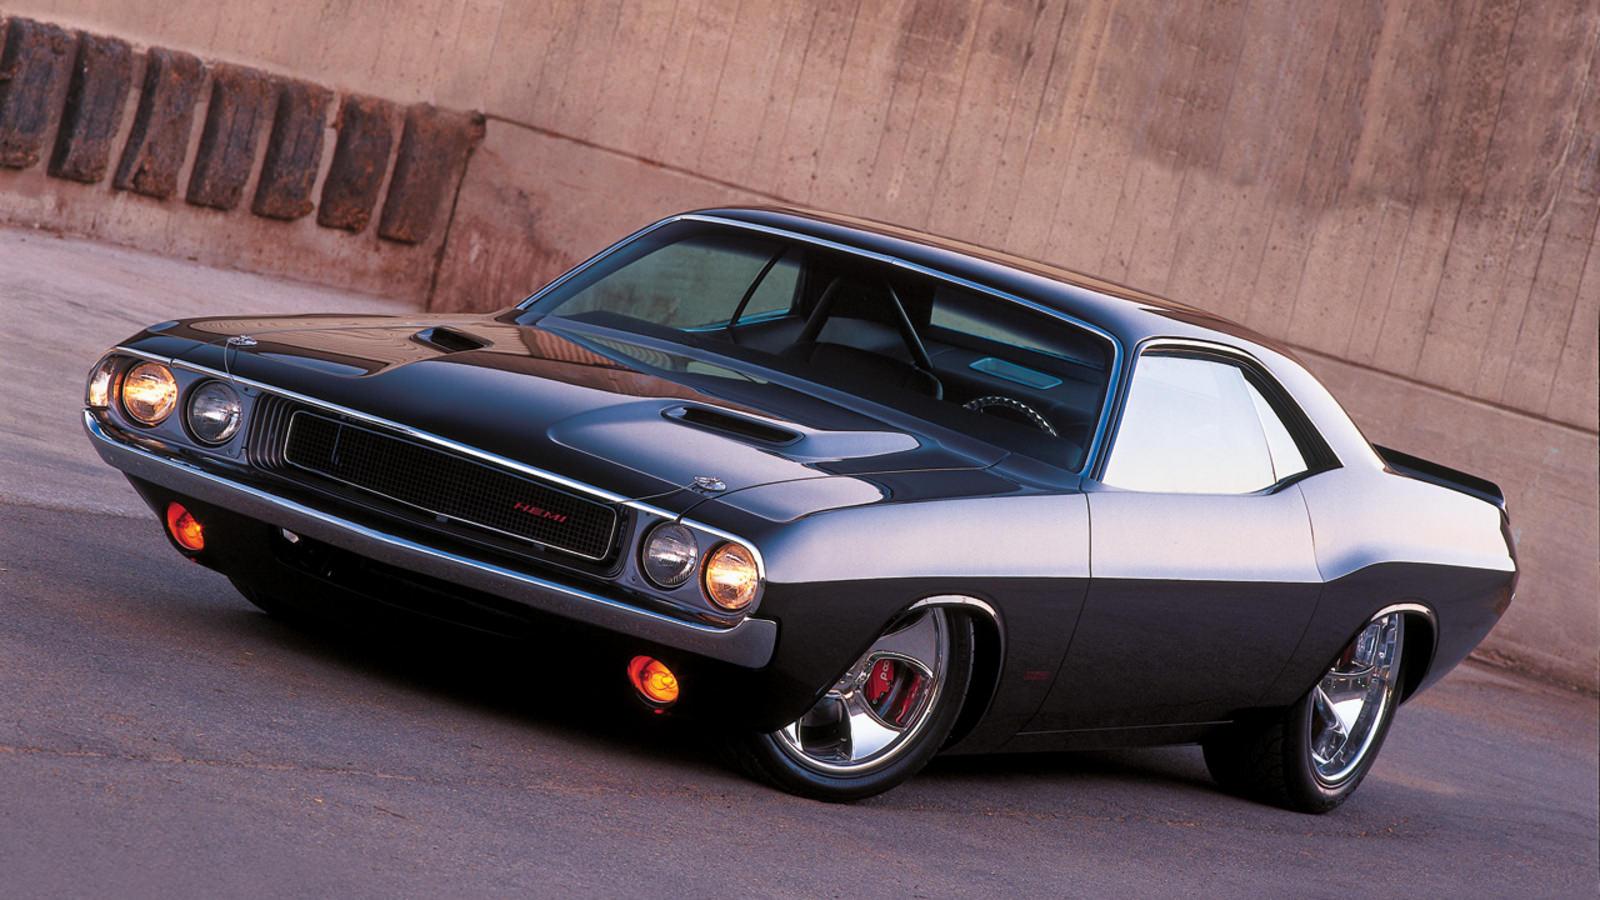 Wallpapers Hd Cars Muscle